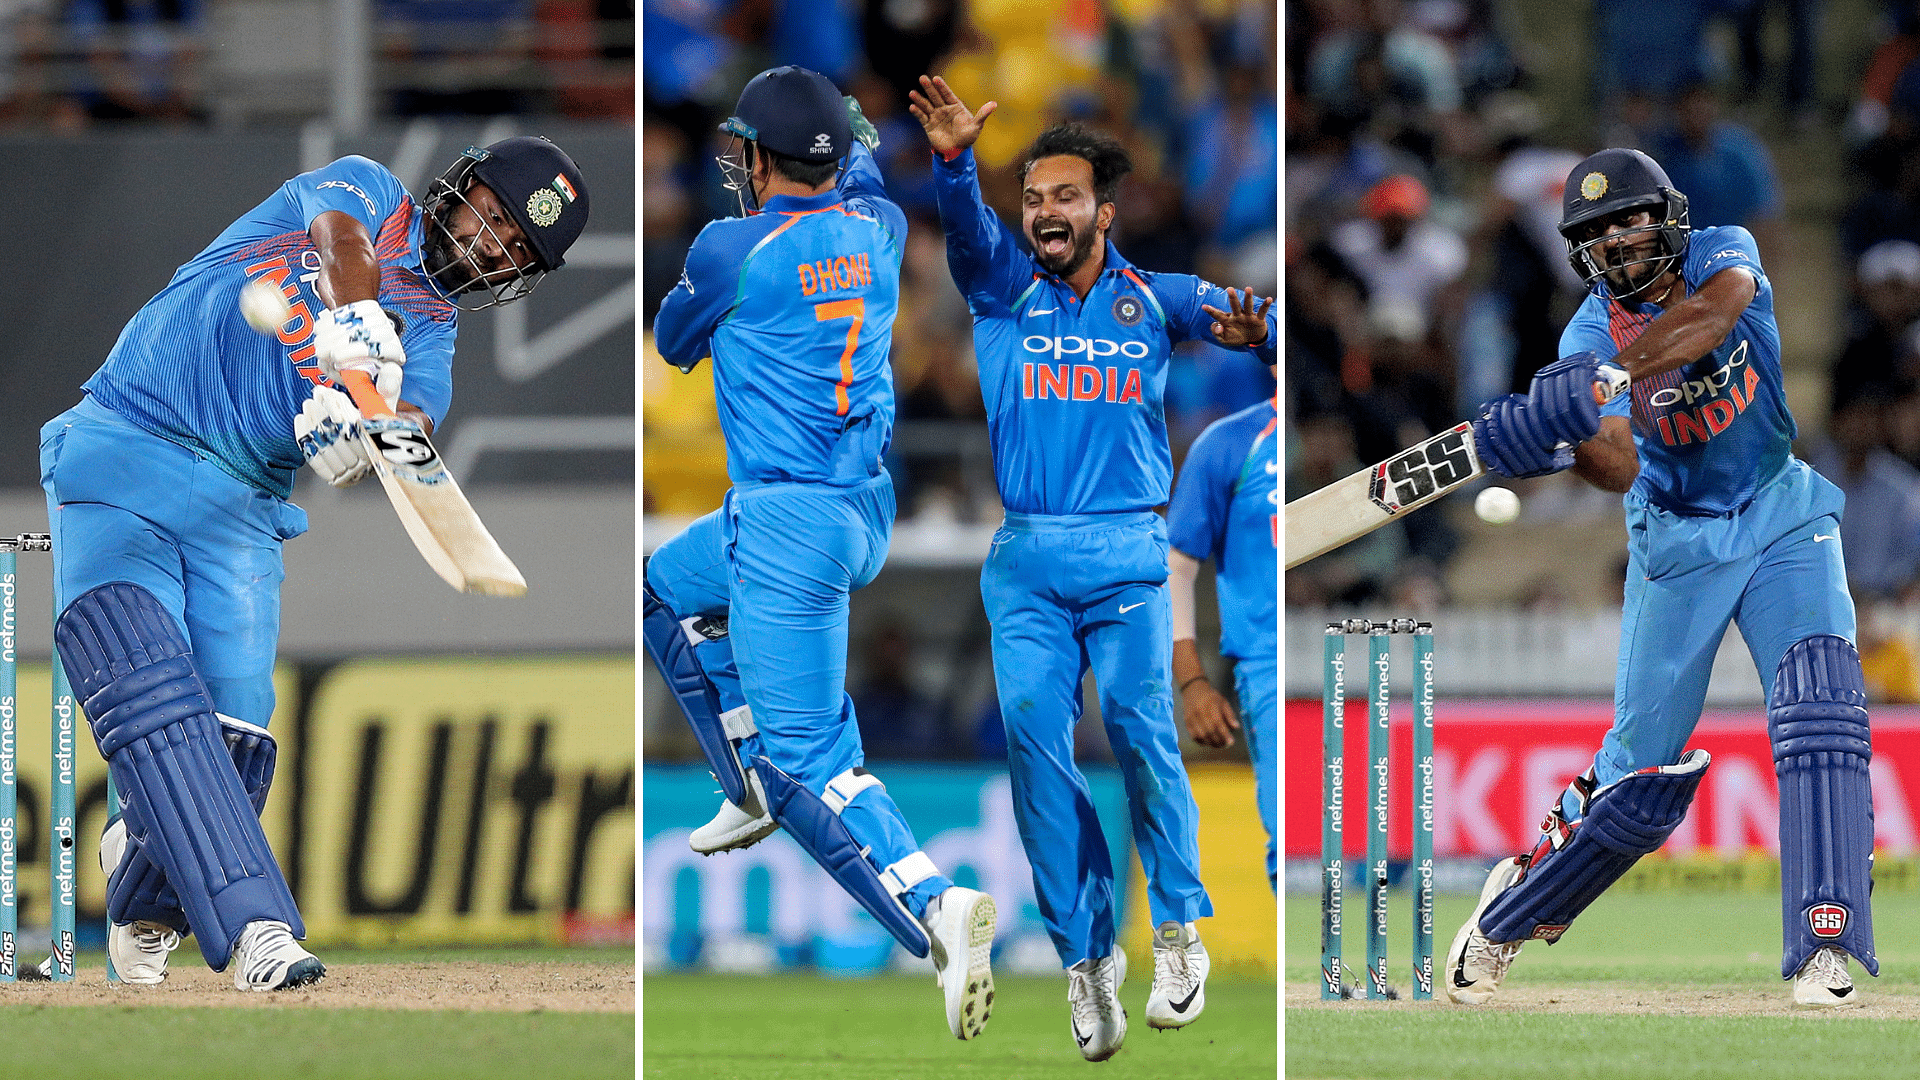 The takeaways from India’s limited overs tour of New Zealand, where they cruised in the ODIs but fell short in the T20Is.